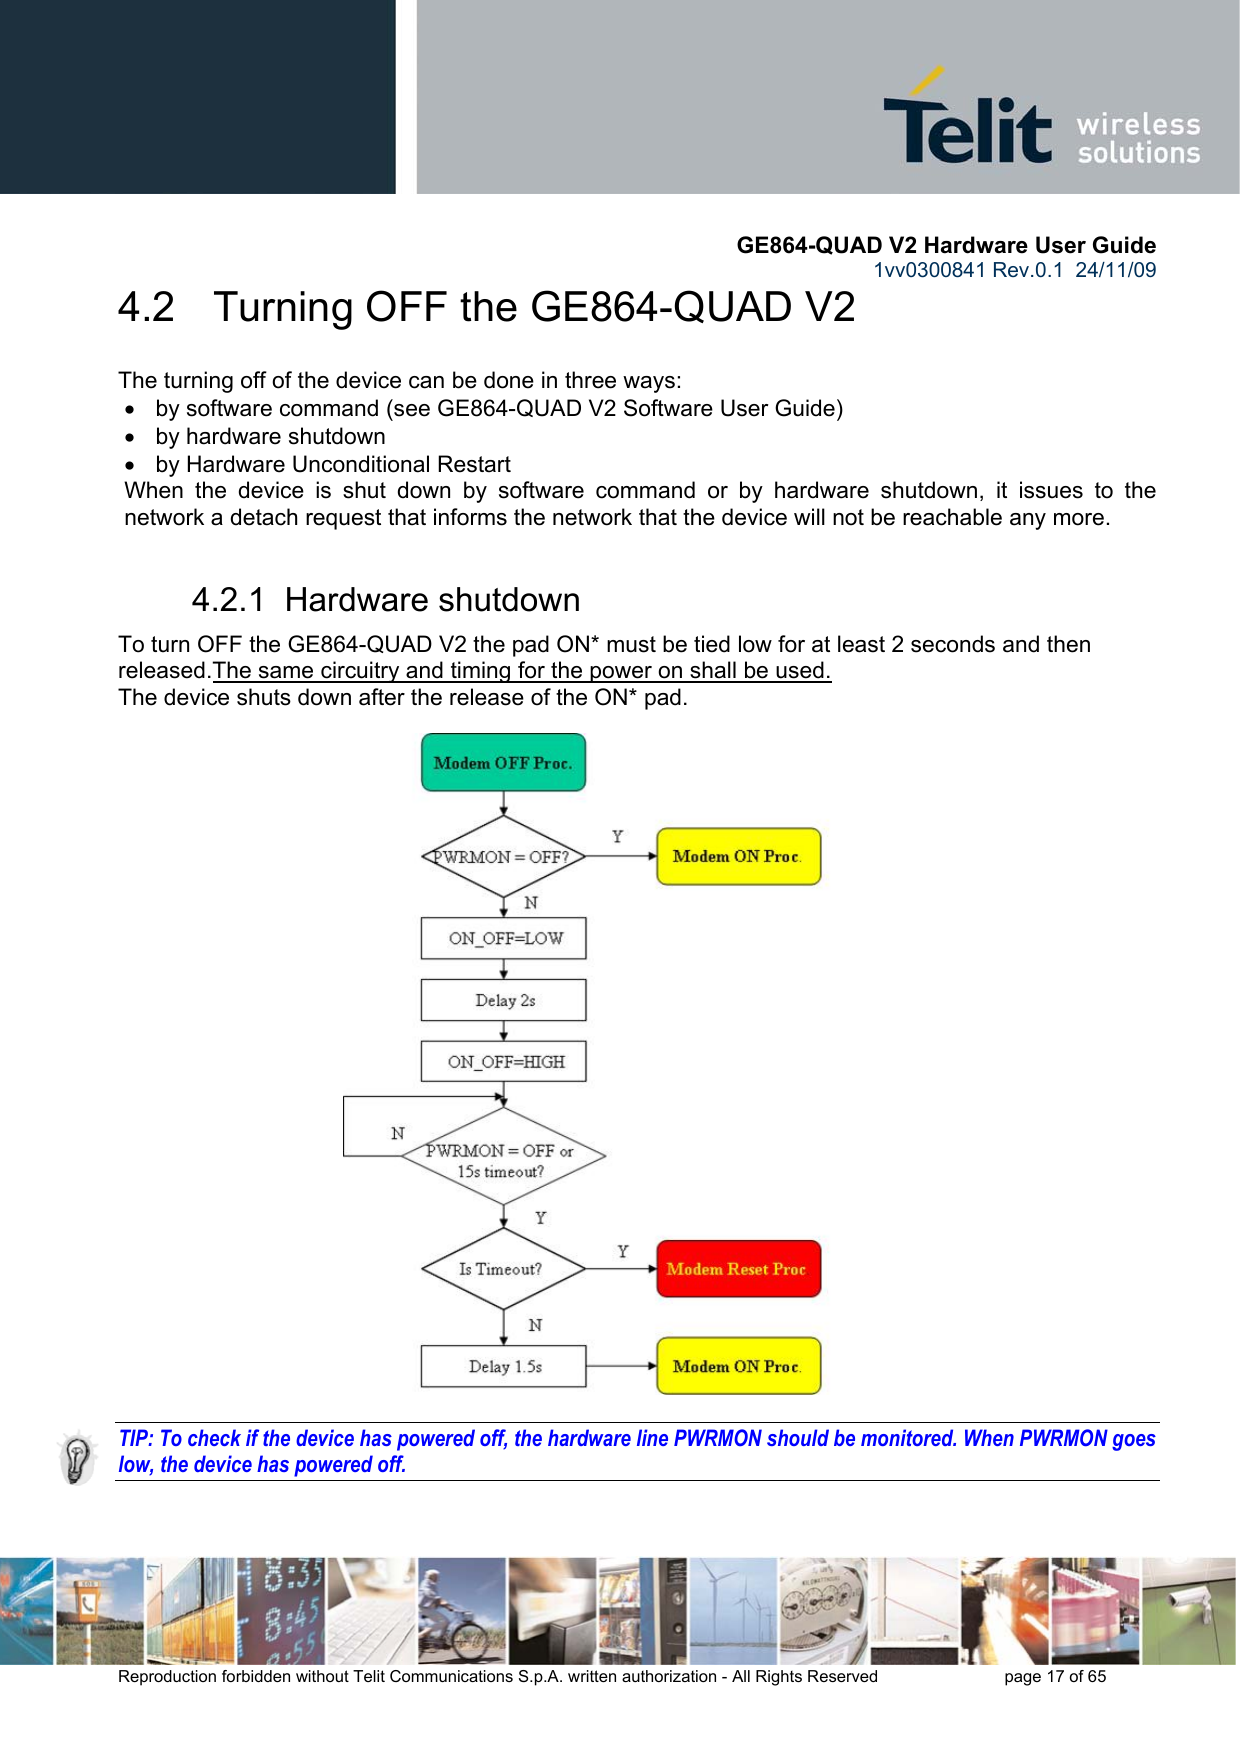       GE864-QUAD V2 Hardware User Guide 1vv0300841 Rev.0.1  24/11/09      Reproduction forbidden without Telit Communications S.p.A. written authorization - All Rights Reserved    page 17 of 65  4.2   Turning OFF the GE864-QUAD V2 The turning off of the device can be done in three ways: •  by software command (see GE864-QUAD V2 Software User Guide) •  by hardware shutdown •  by Hardware Unconditional Restart When the device is shut down by software command or by hardware shutdown, it issues to the network a detach request that informs the network that the device will not be reachable any more.  4.2.1  Hardware shutdown To turn OFF the GE864-QUAD V2 the pad ON* must be tied low for at least 2 seconds and then released.The same circuitry and timing for the power on shall be used. The device shuts down after the release of the ON* pad.                             TIP: To check if the device has powered off, the hardware line PWRMON should be monitored. When PWRMON goes low, the device has powered off.  